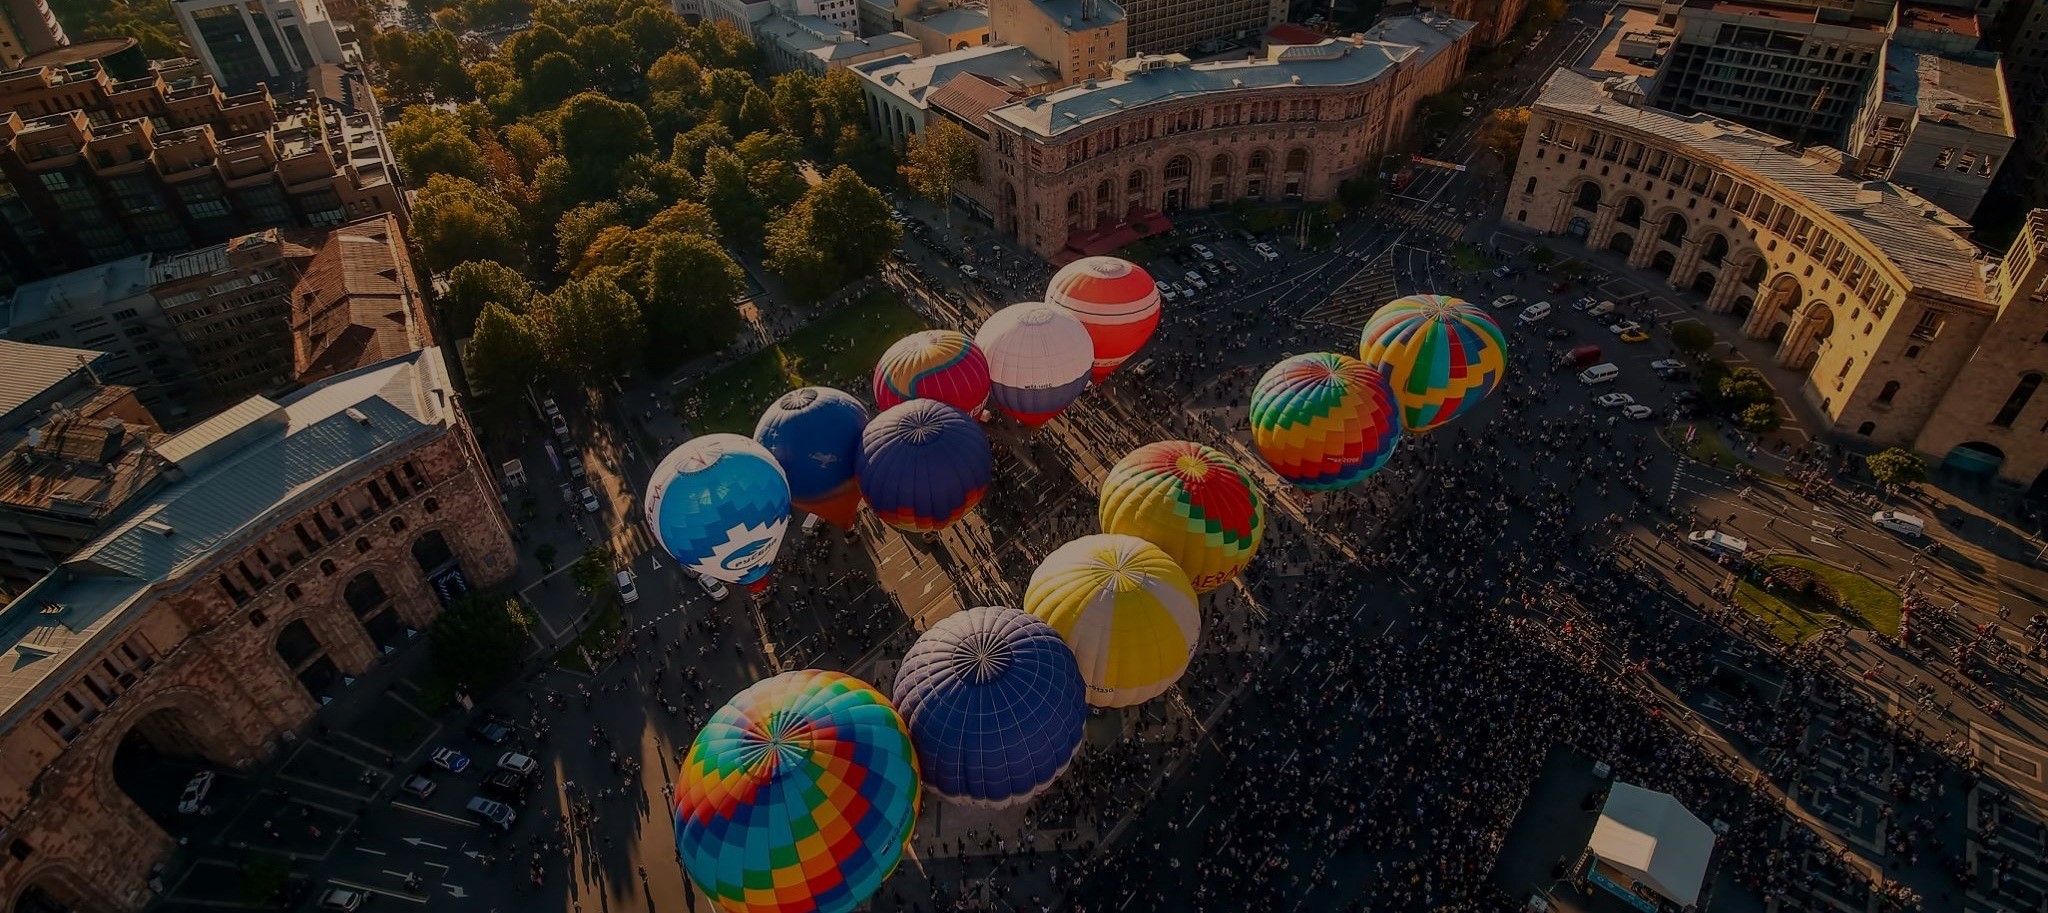 Group flight during the festival (October 13-16)